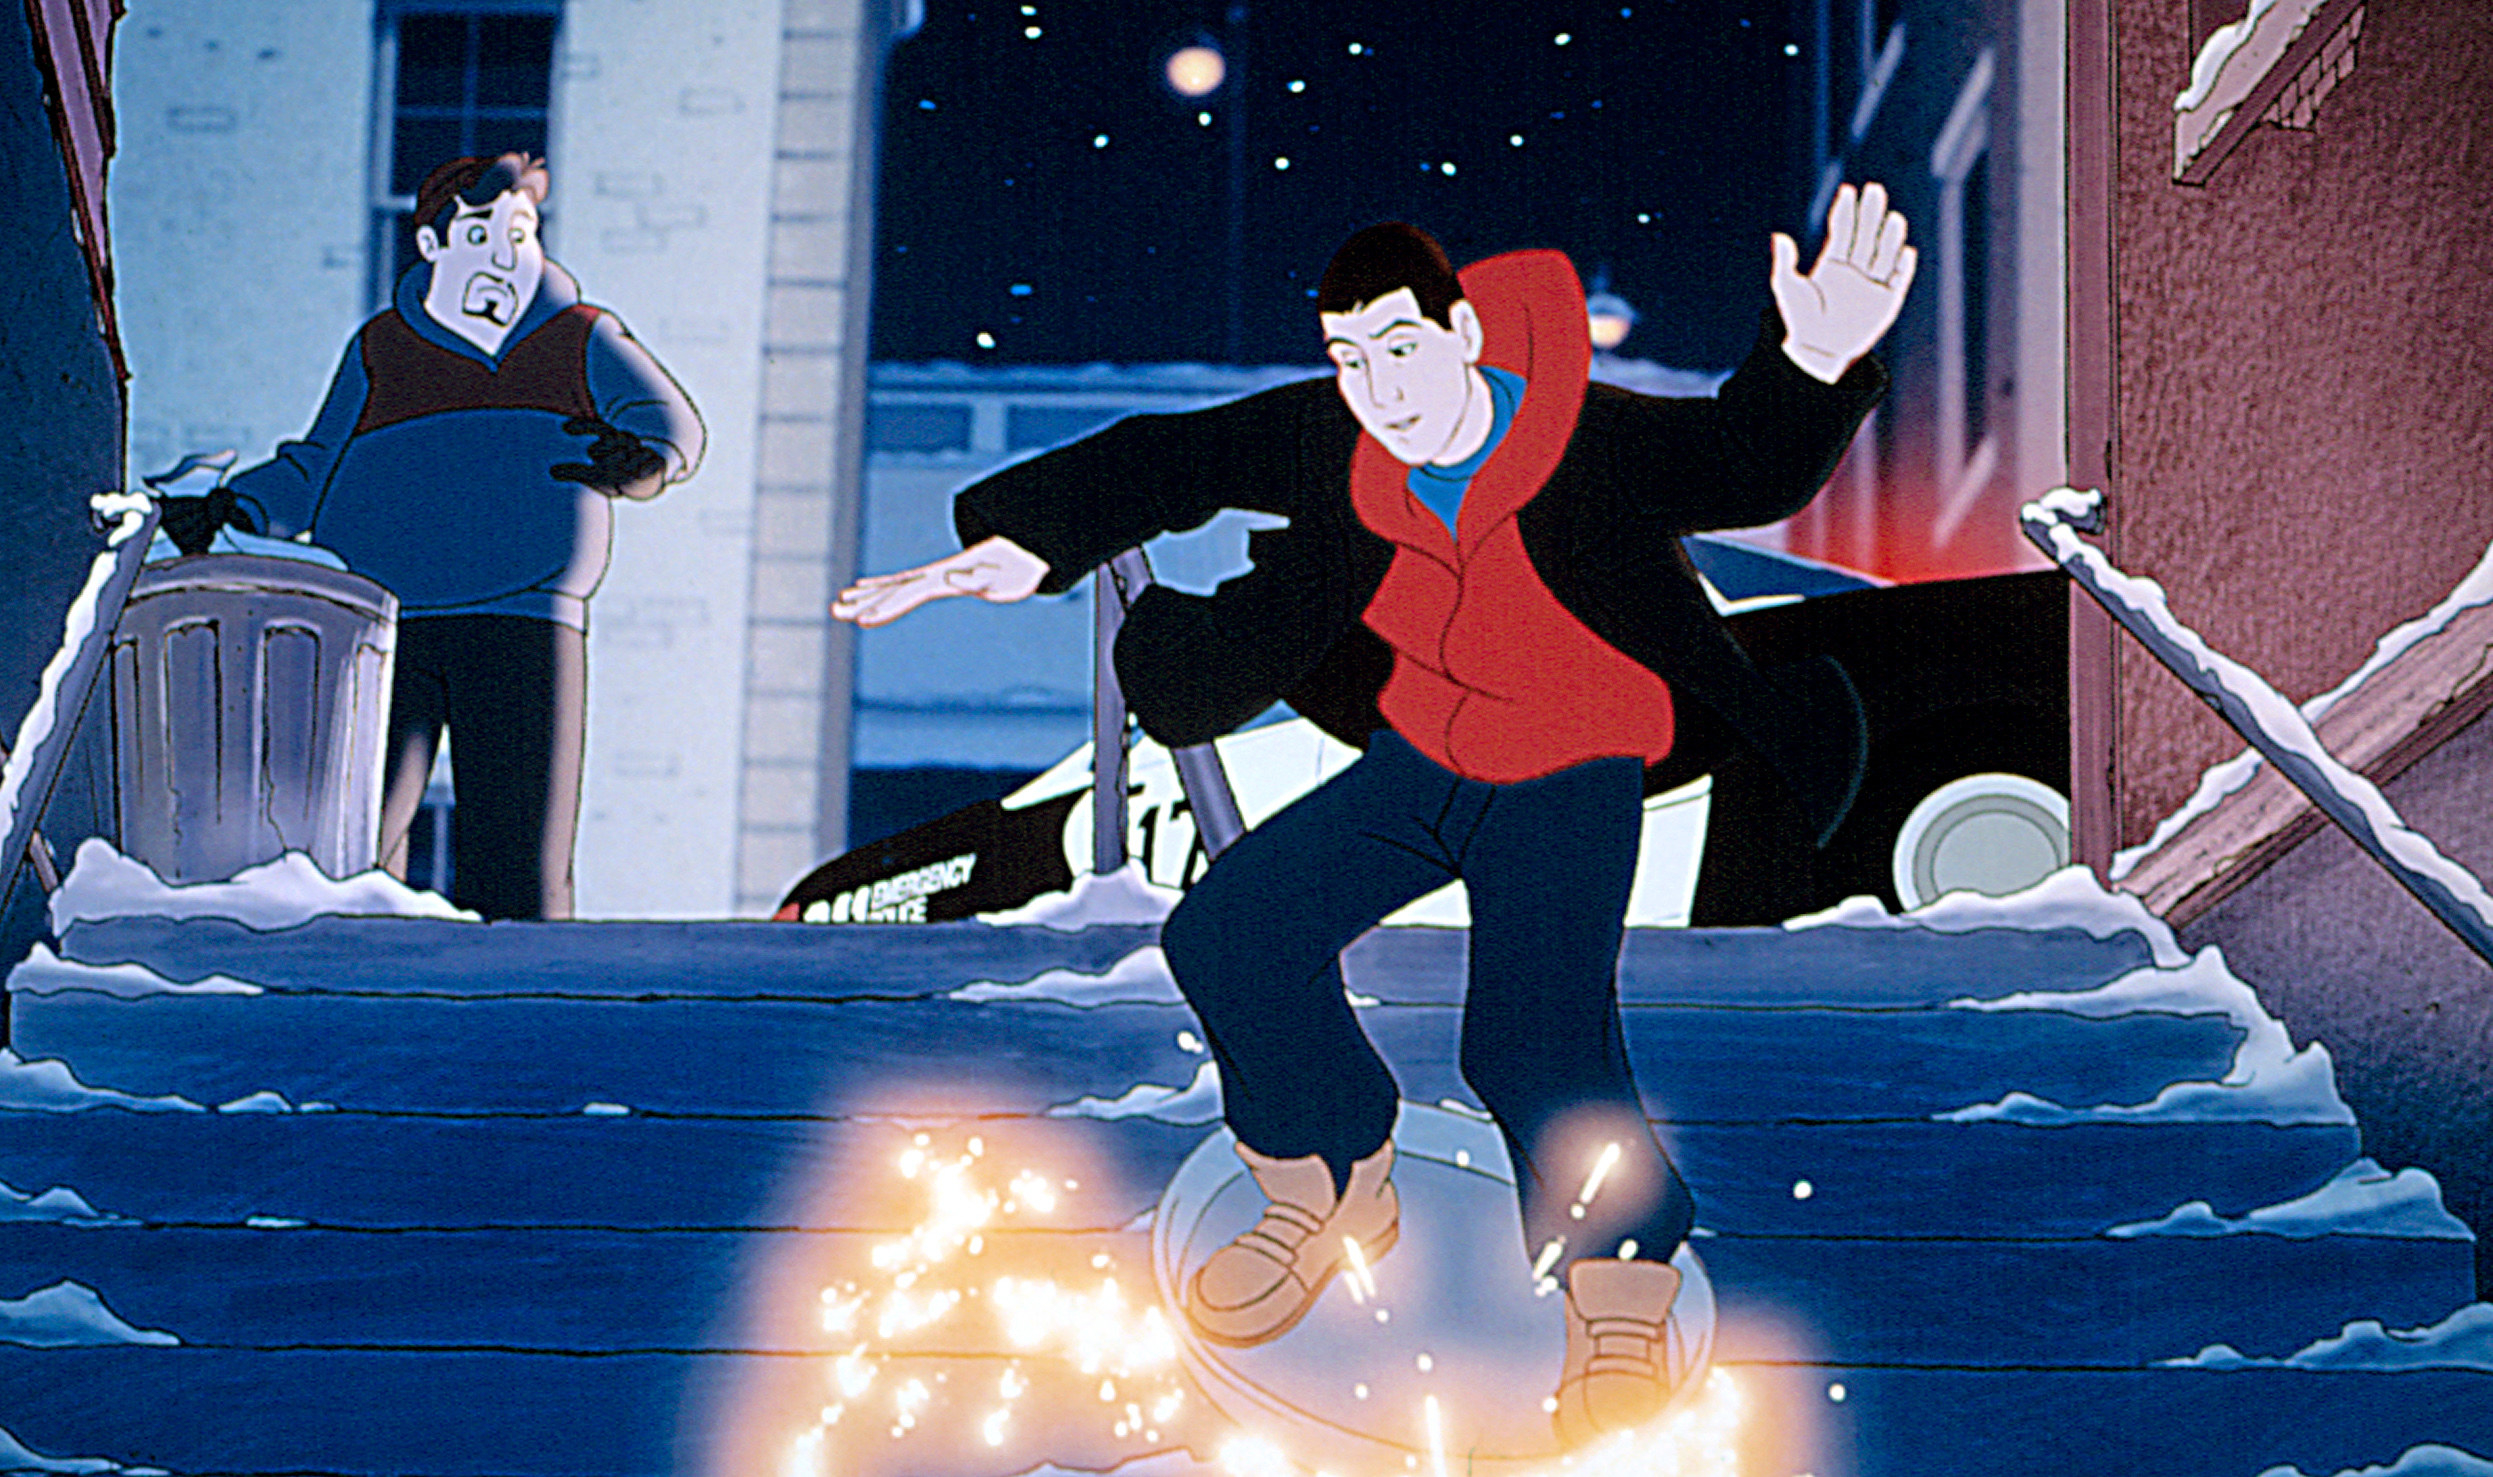 Davey Stone (Adam Sandler) rides a garbage can lid down a handrail in &quot;Eight Crazy Nights&quot;